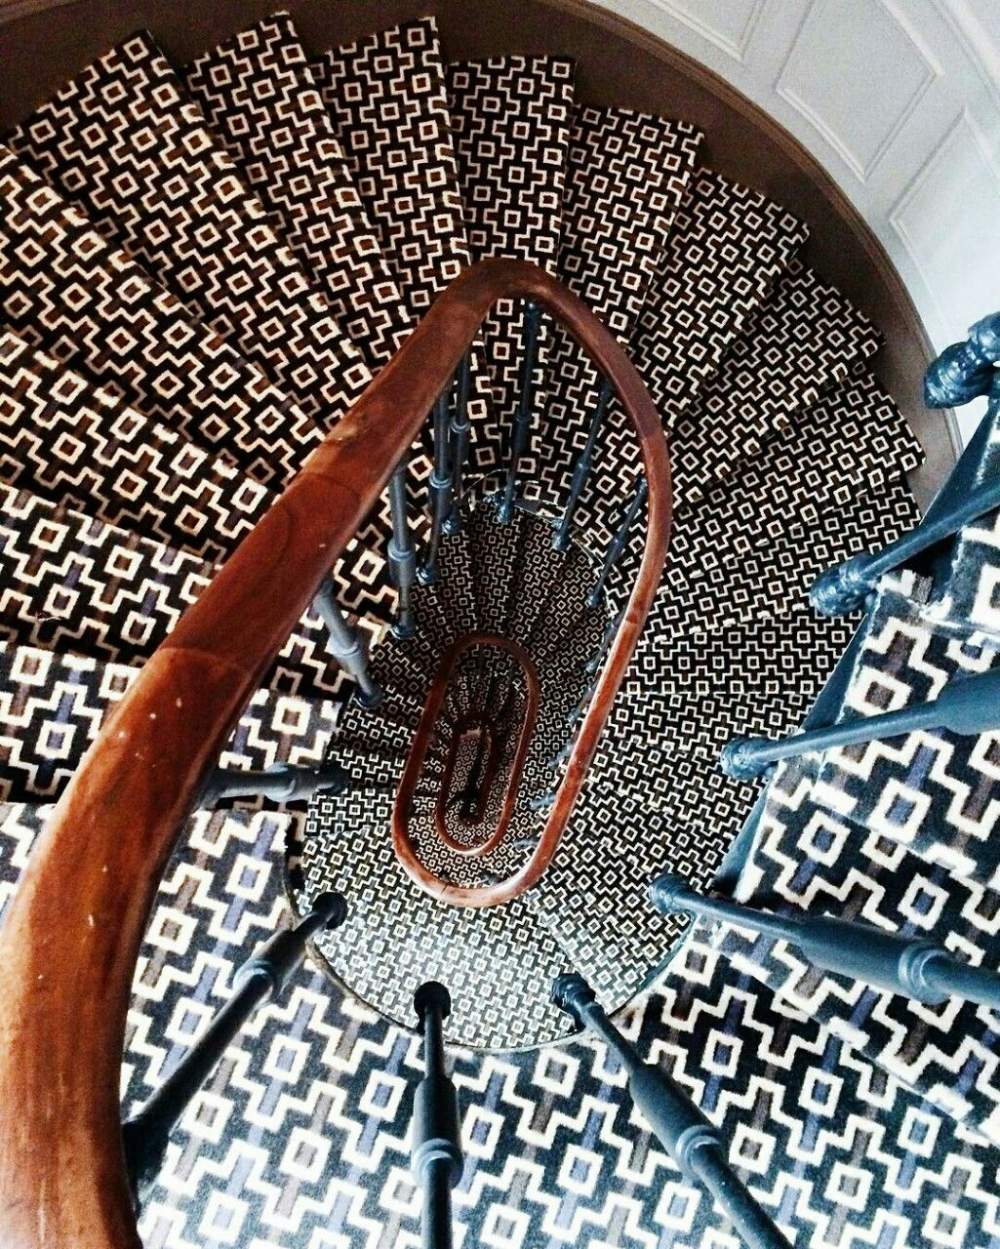 spiral staircase is trippy